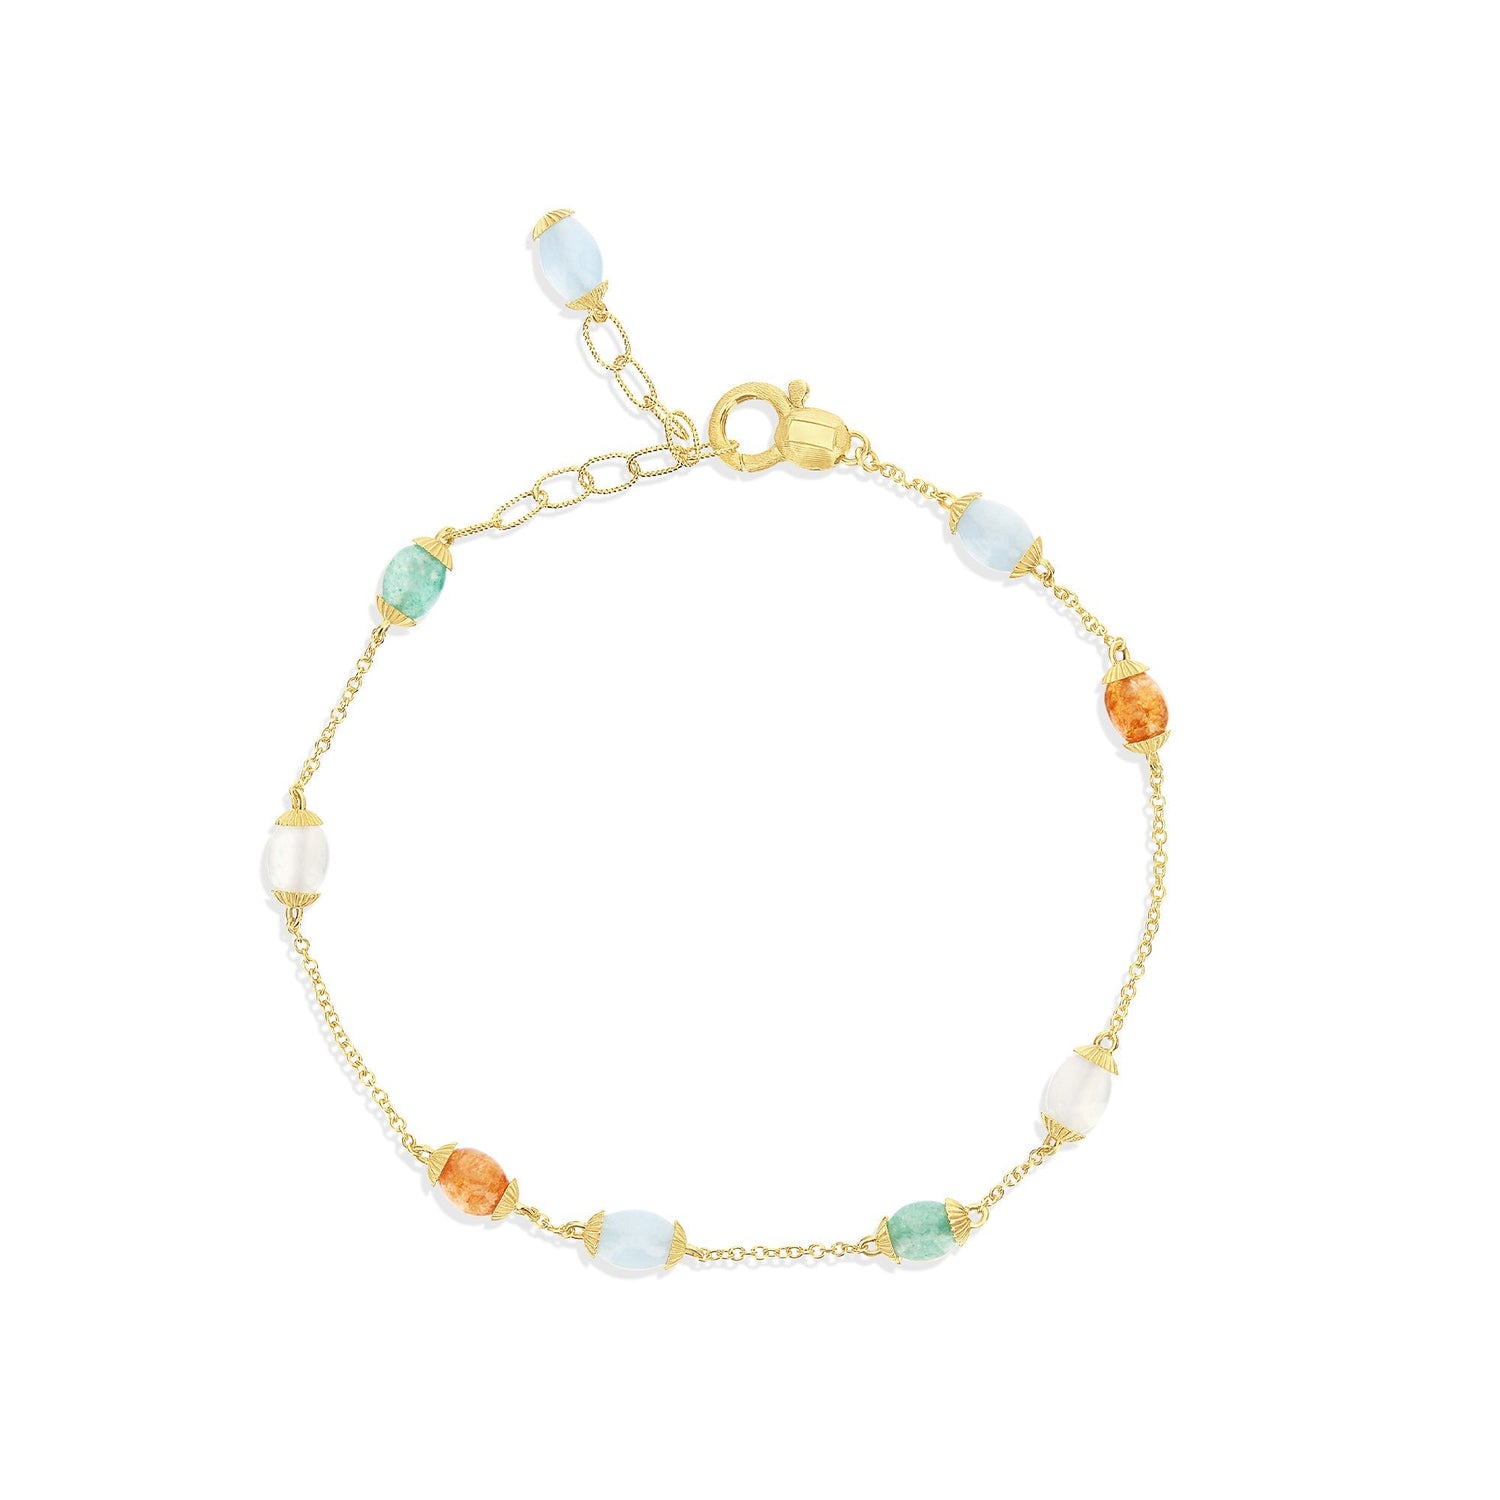 RAINBOW "AMULETS" GOLD AND NATURAL STONES BRACELET